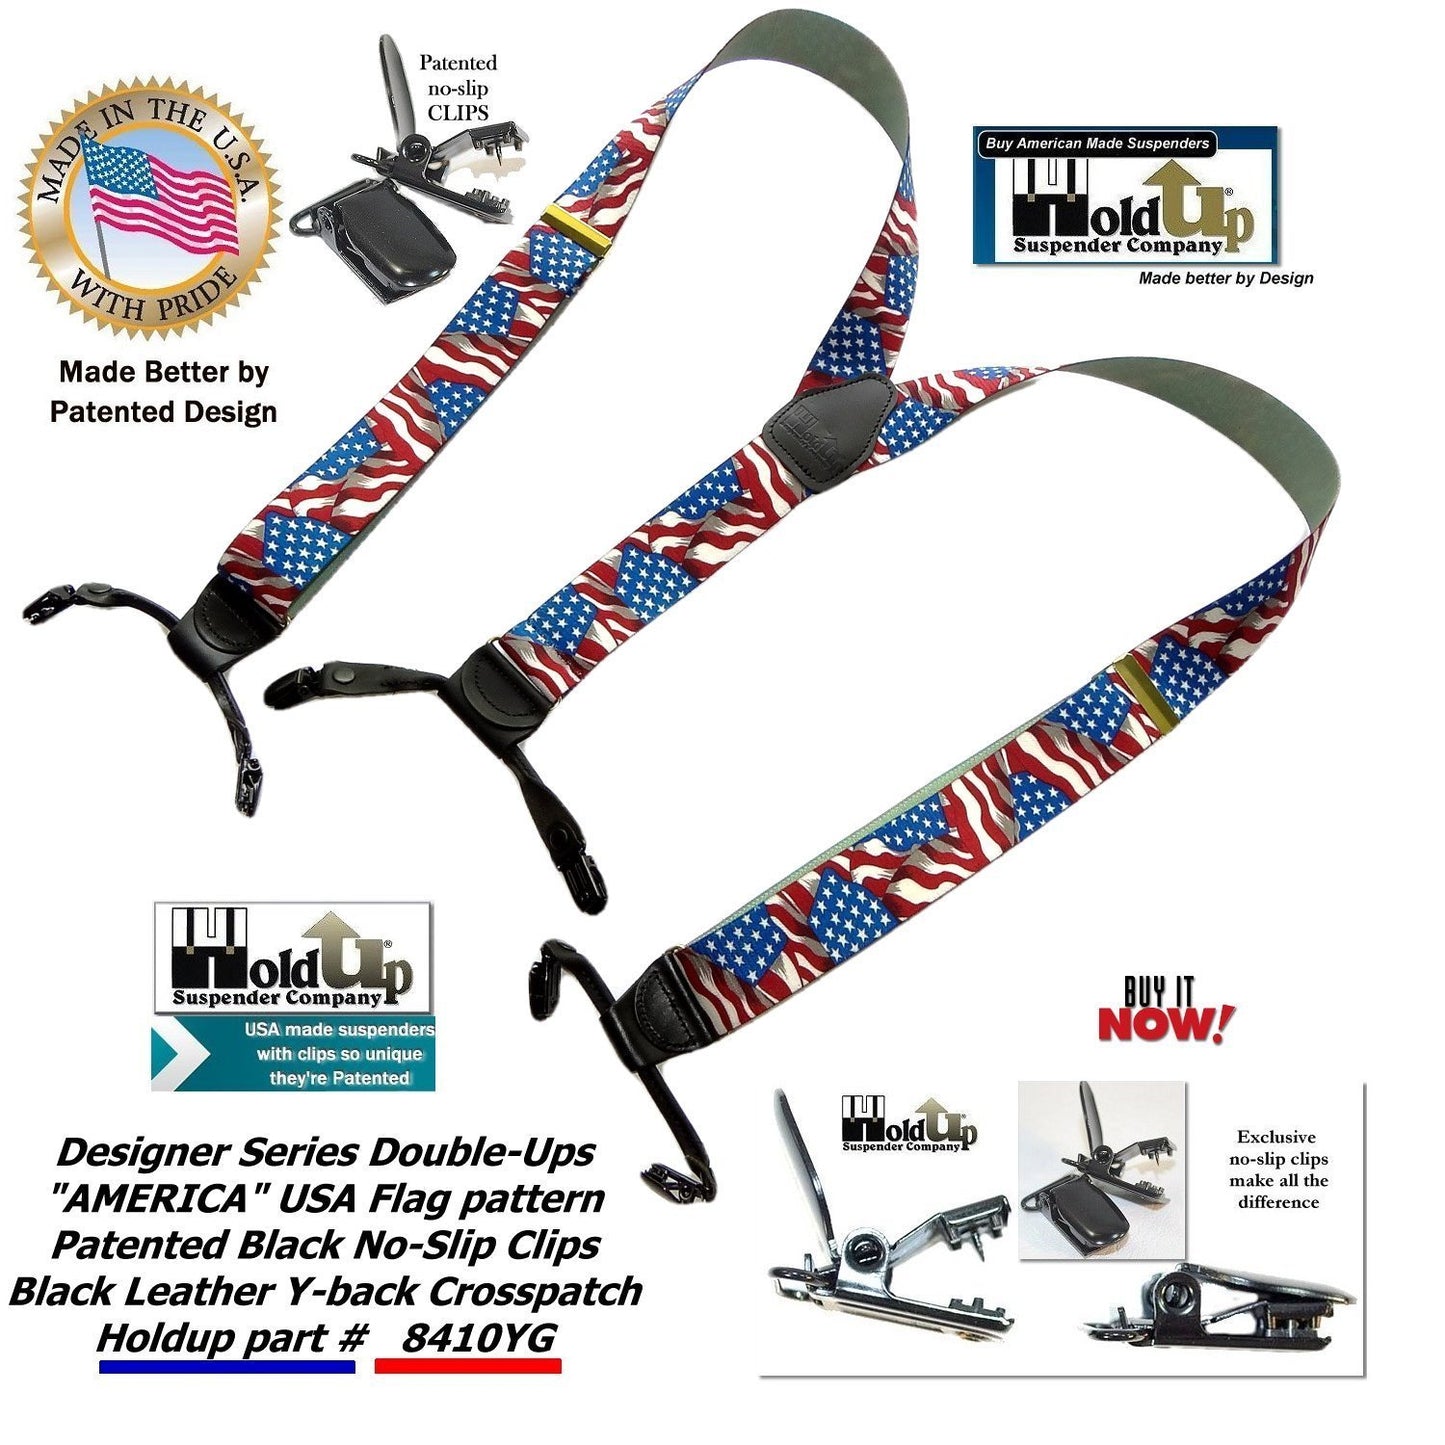 Holdup Brand Double-Ups Style Designer Series American Flag Pattern clip-on Suspenders